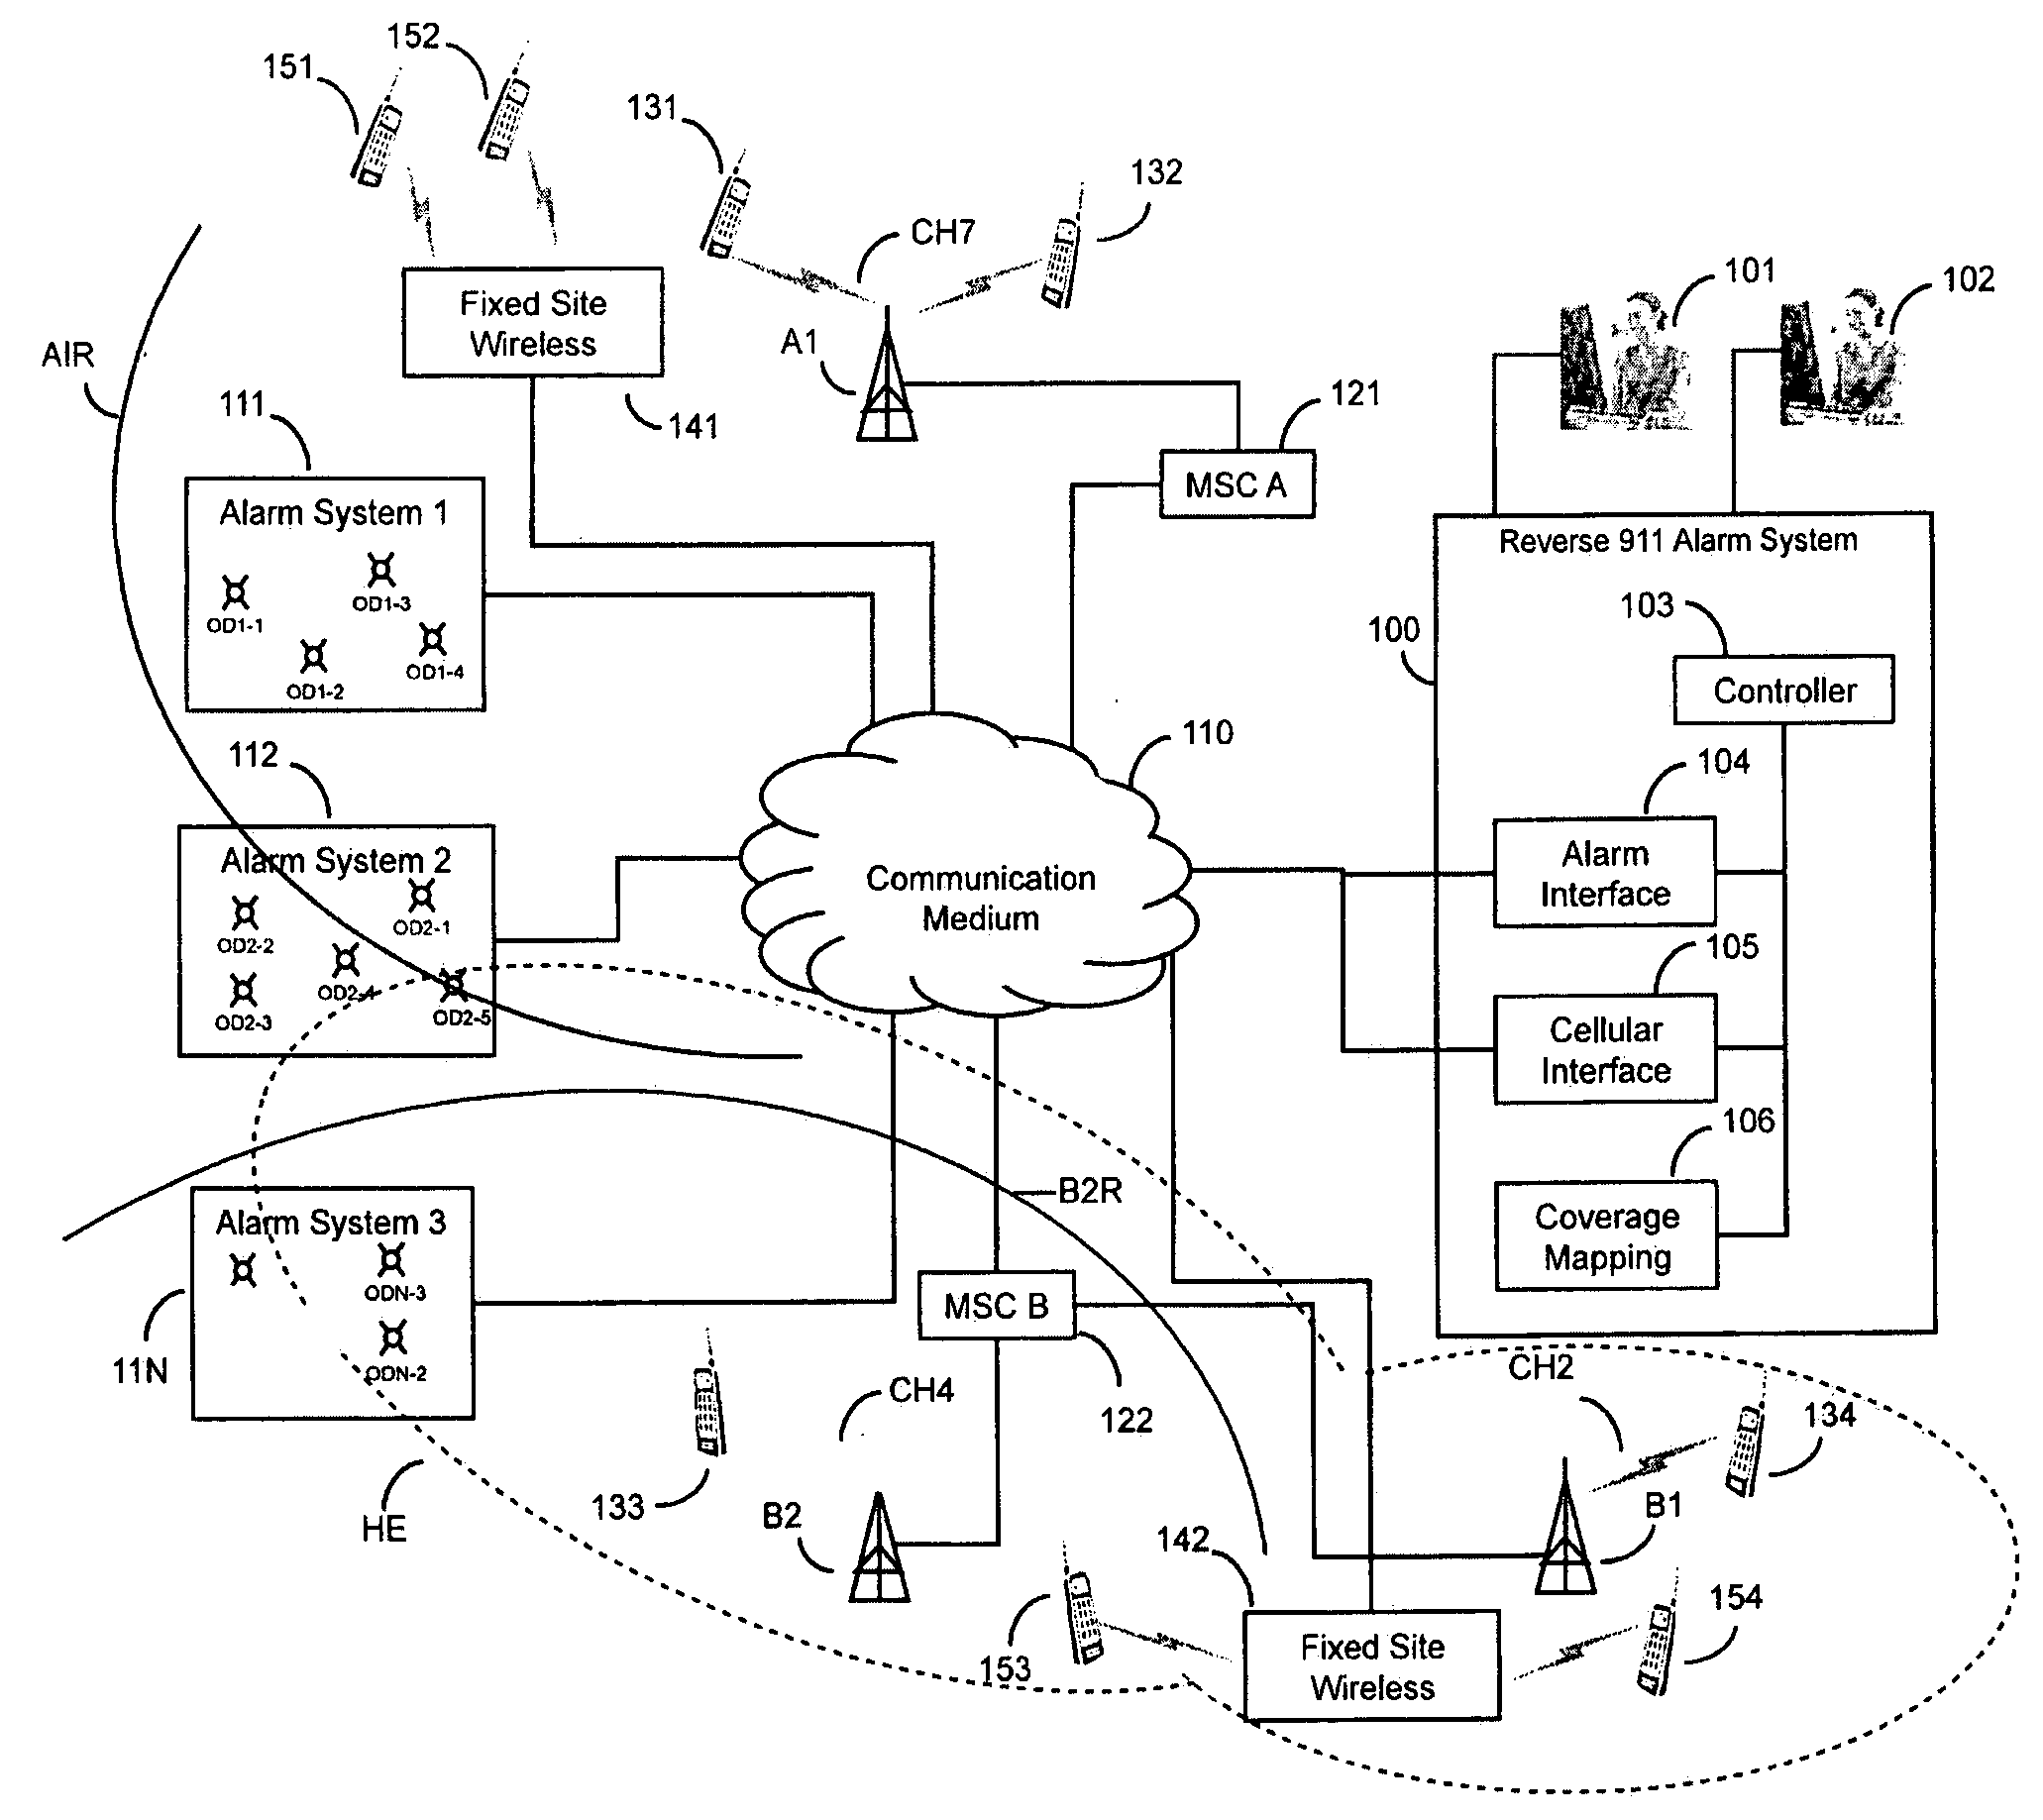 System for controlling the operation of wireless multicasting systems to distribute an alarm indication to a dynamically configured coverage area